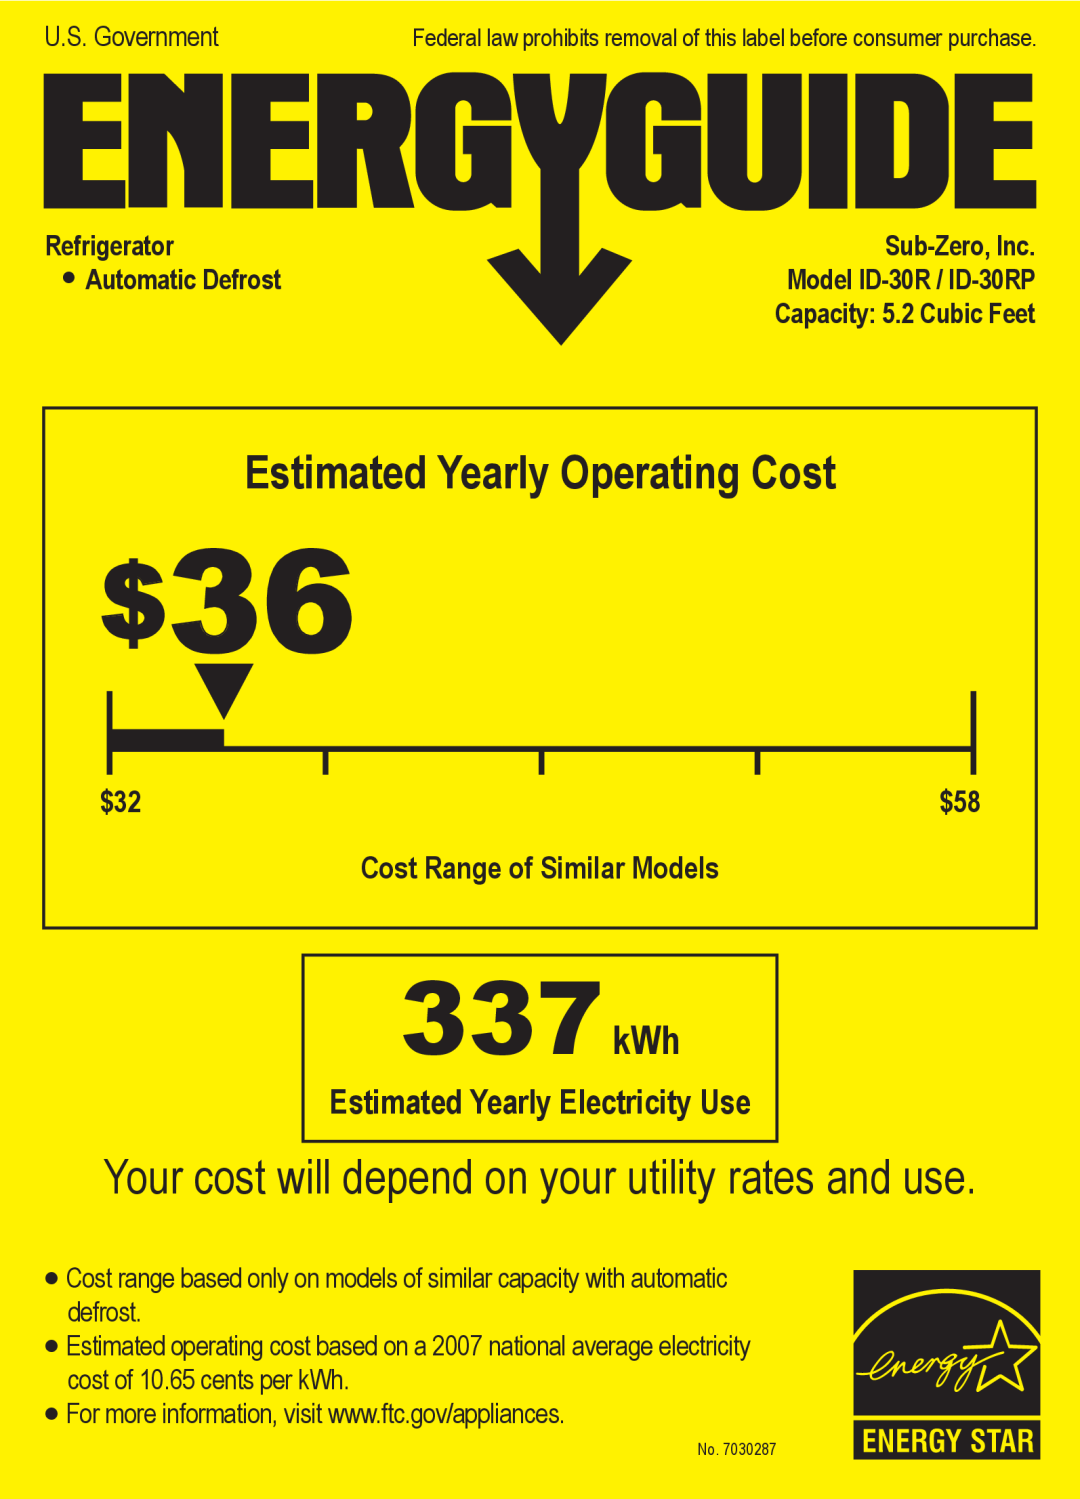 Sub-Zero ID-30RP manual Estimated Yearly Electricity Use, 337kWh, Estimated Yearly Operating Cost, Refrigerator 